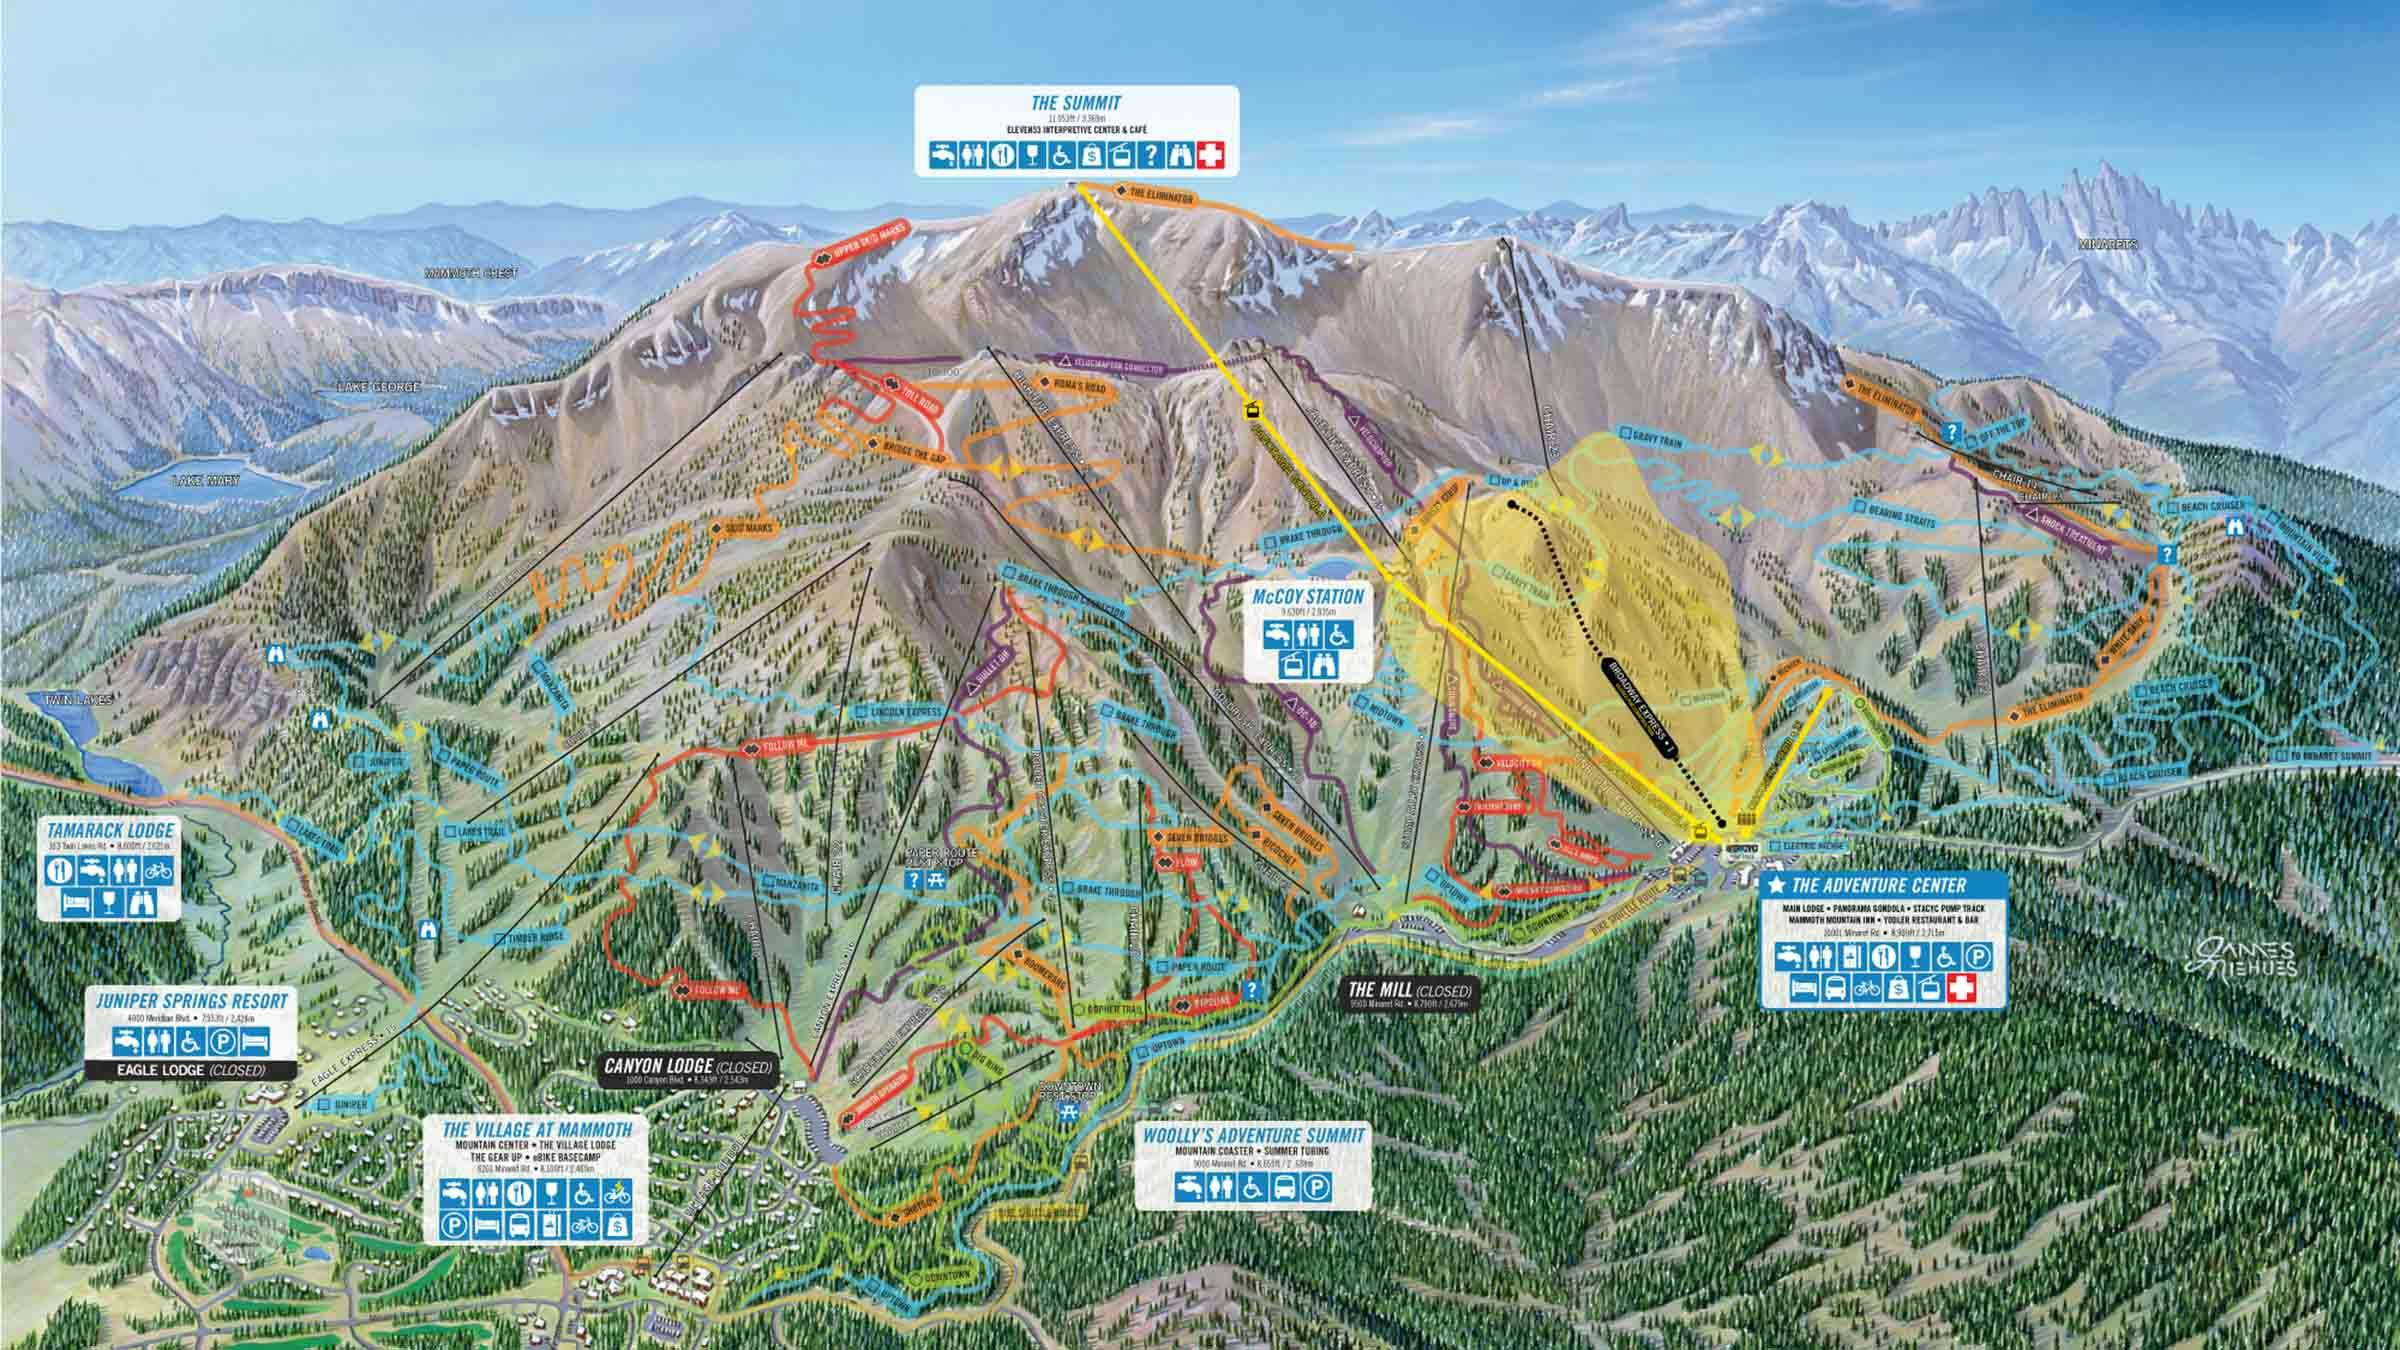 Mammoth Bike Park Trail Map and Broadway Construction Zone